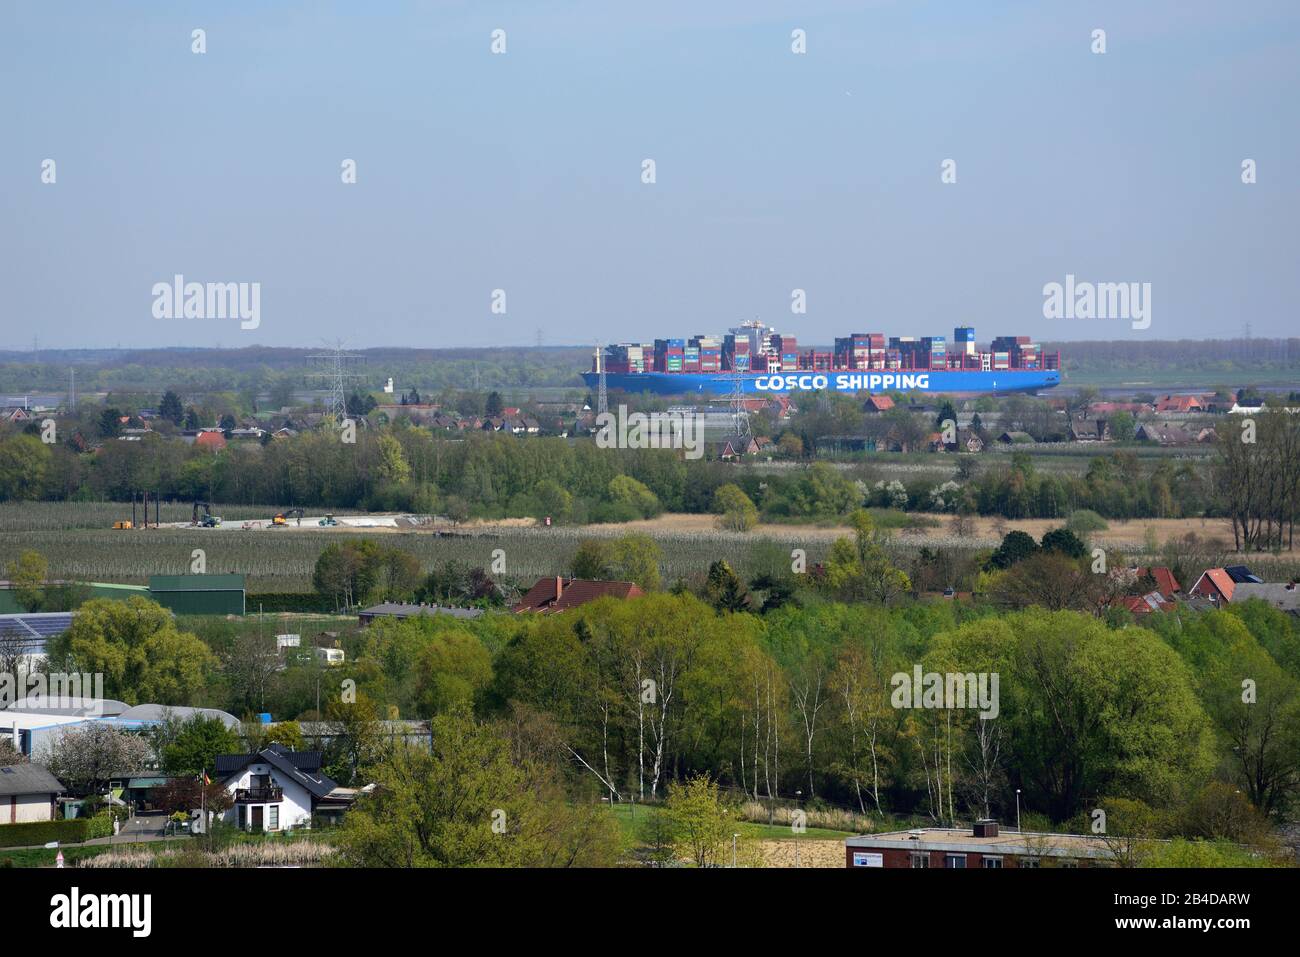 Europe, Germany, Lower Saxony, Stade, Hamburg metropolitan region, Hanseatic city, view from above towards the Elbe and container ship of the Cosco Shipping Line, Stock Photo